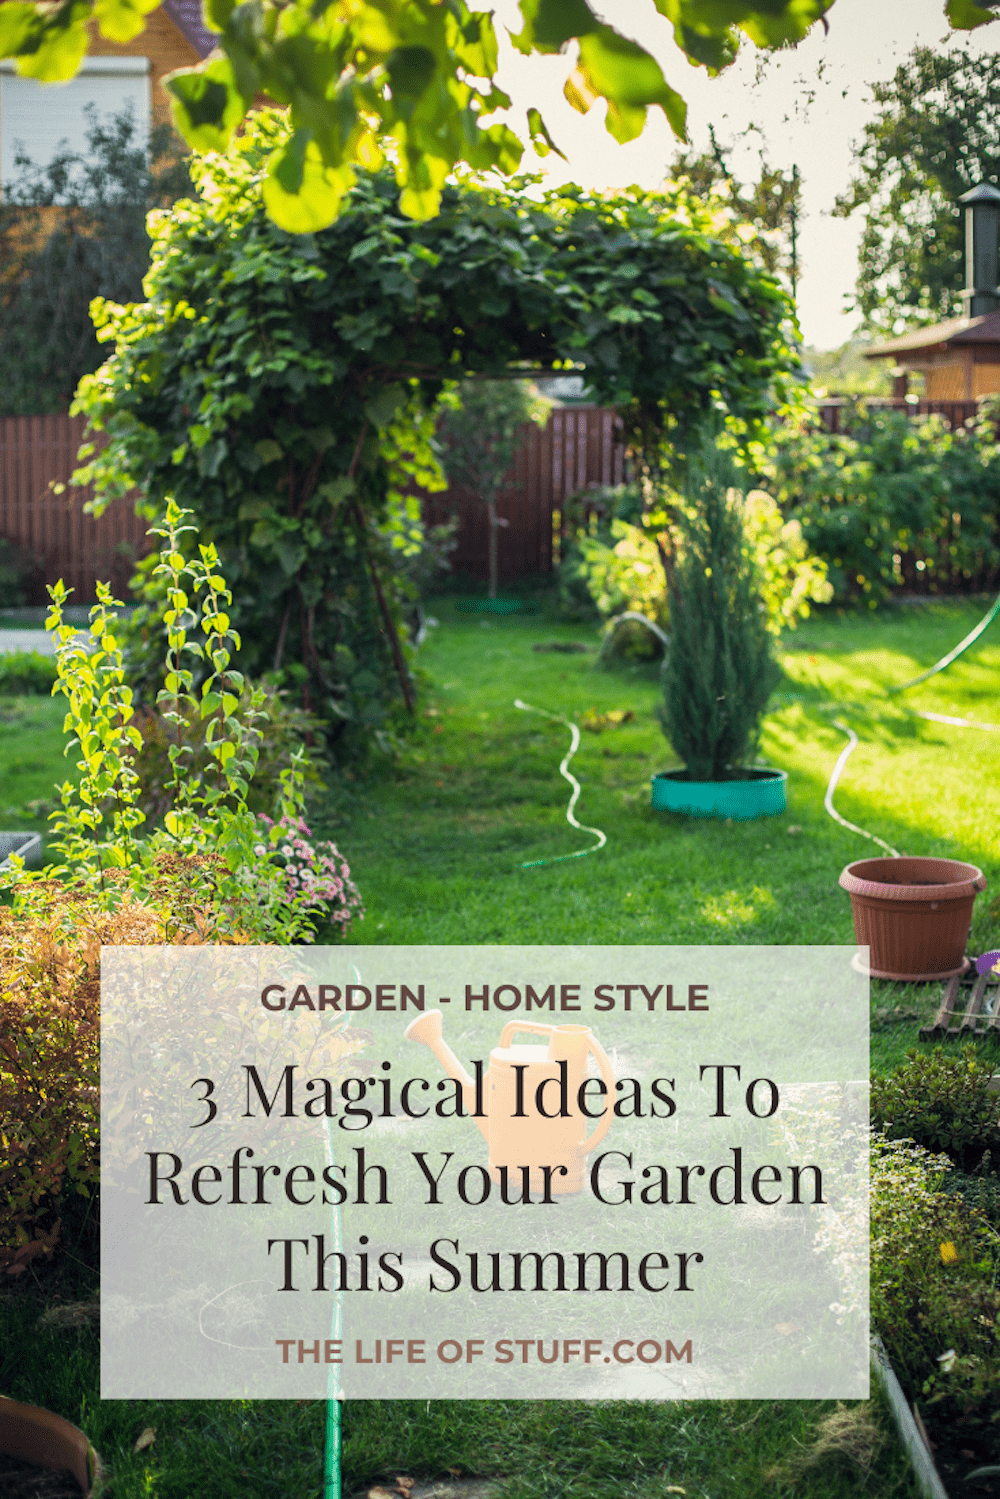 3 Magical Ideas To Refresh Your Garden This Summer - The Life of Stuff